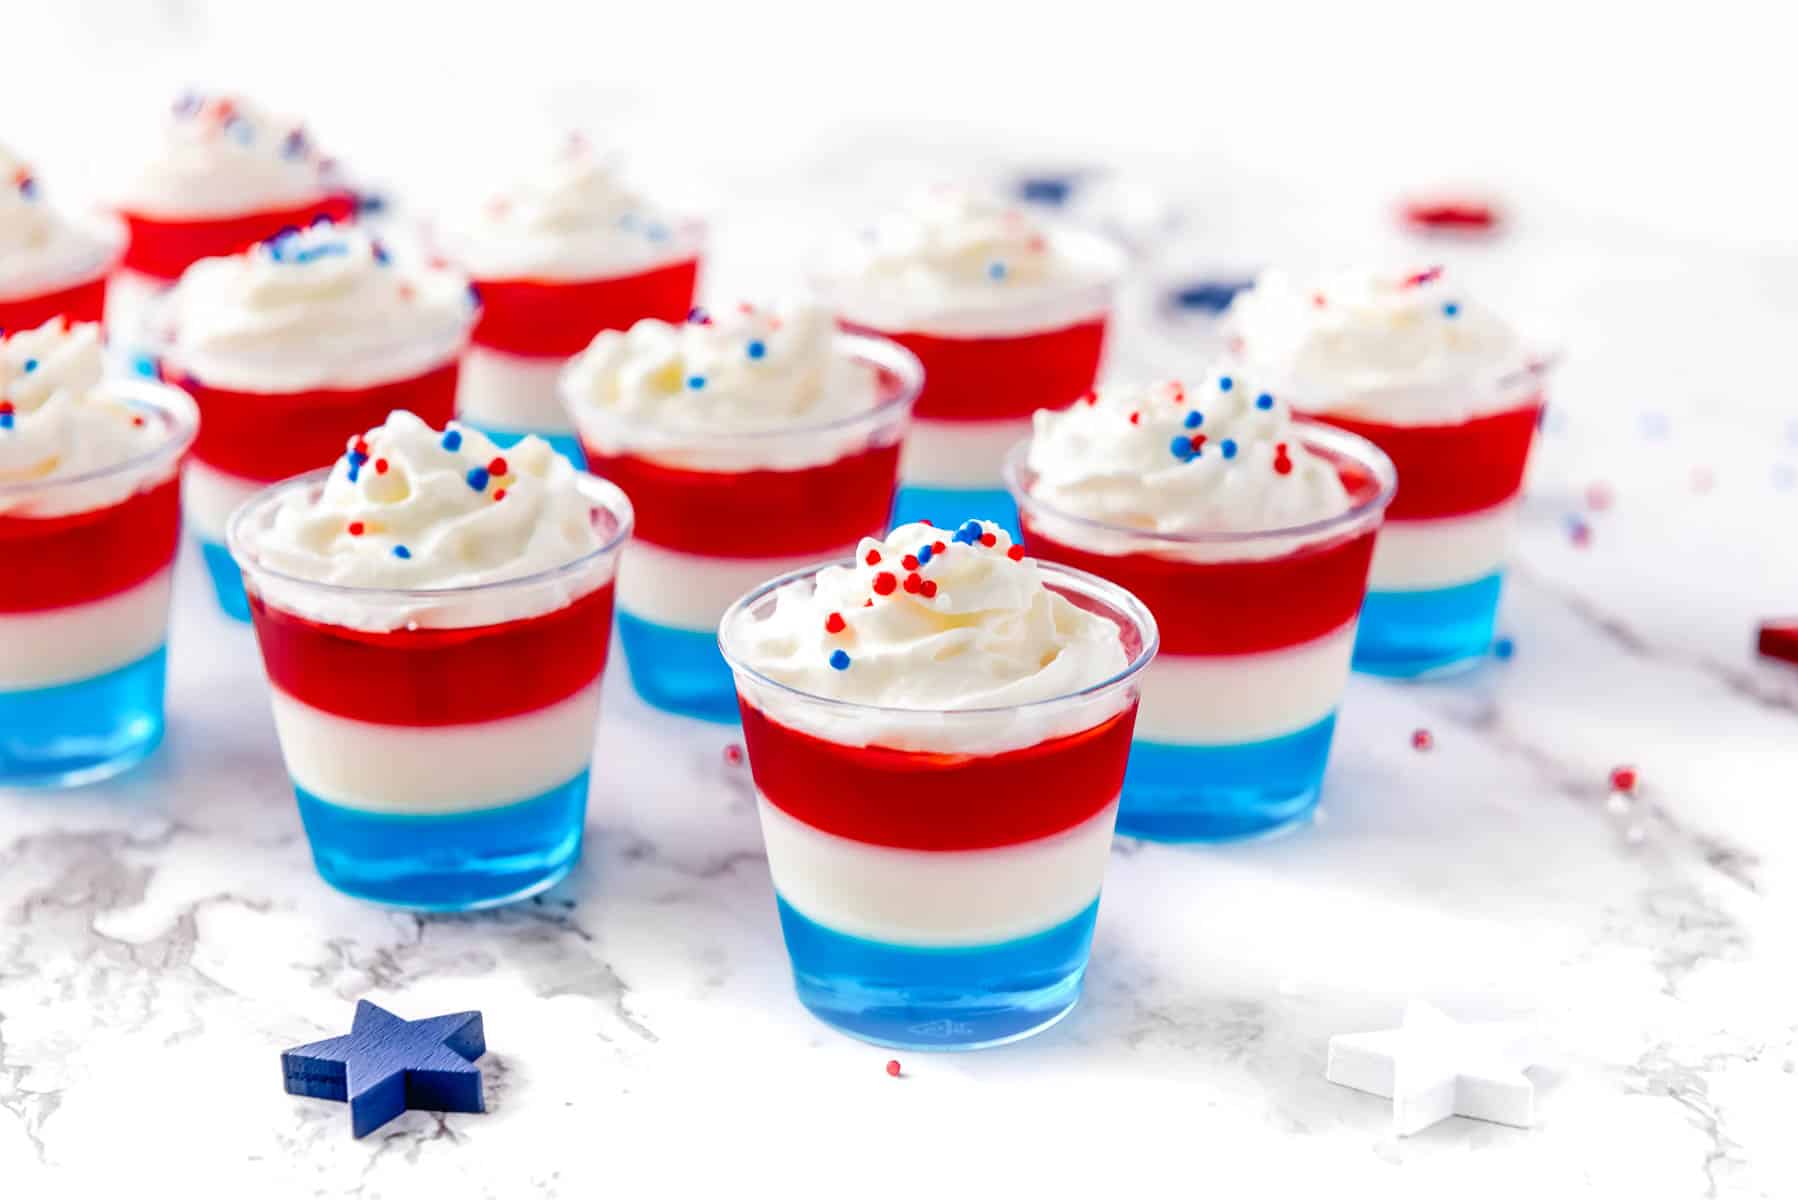 Several cups of layered red, white, and blue gelatin topped with whipped cream and sprinkles are arranged on a white surface.